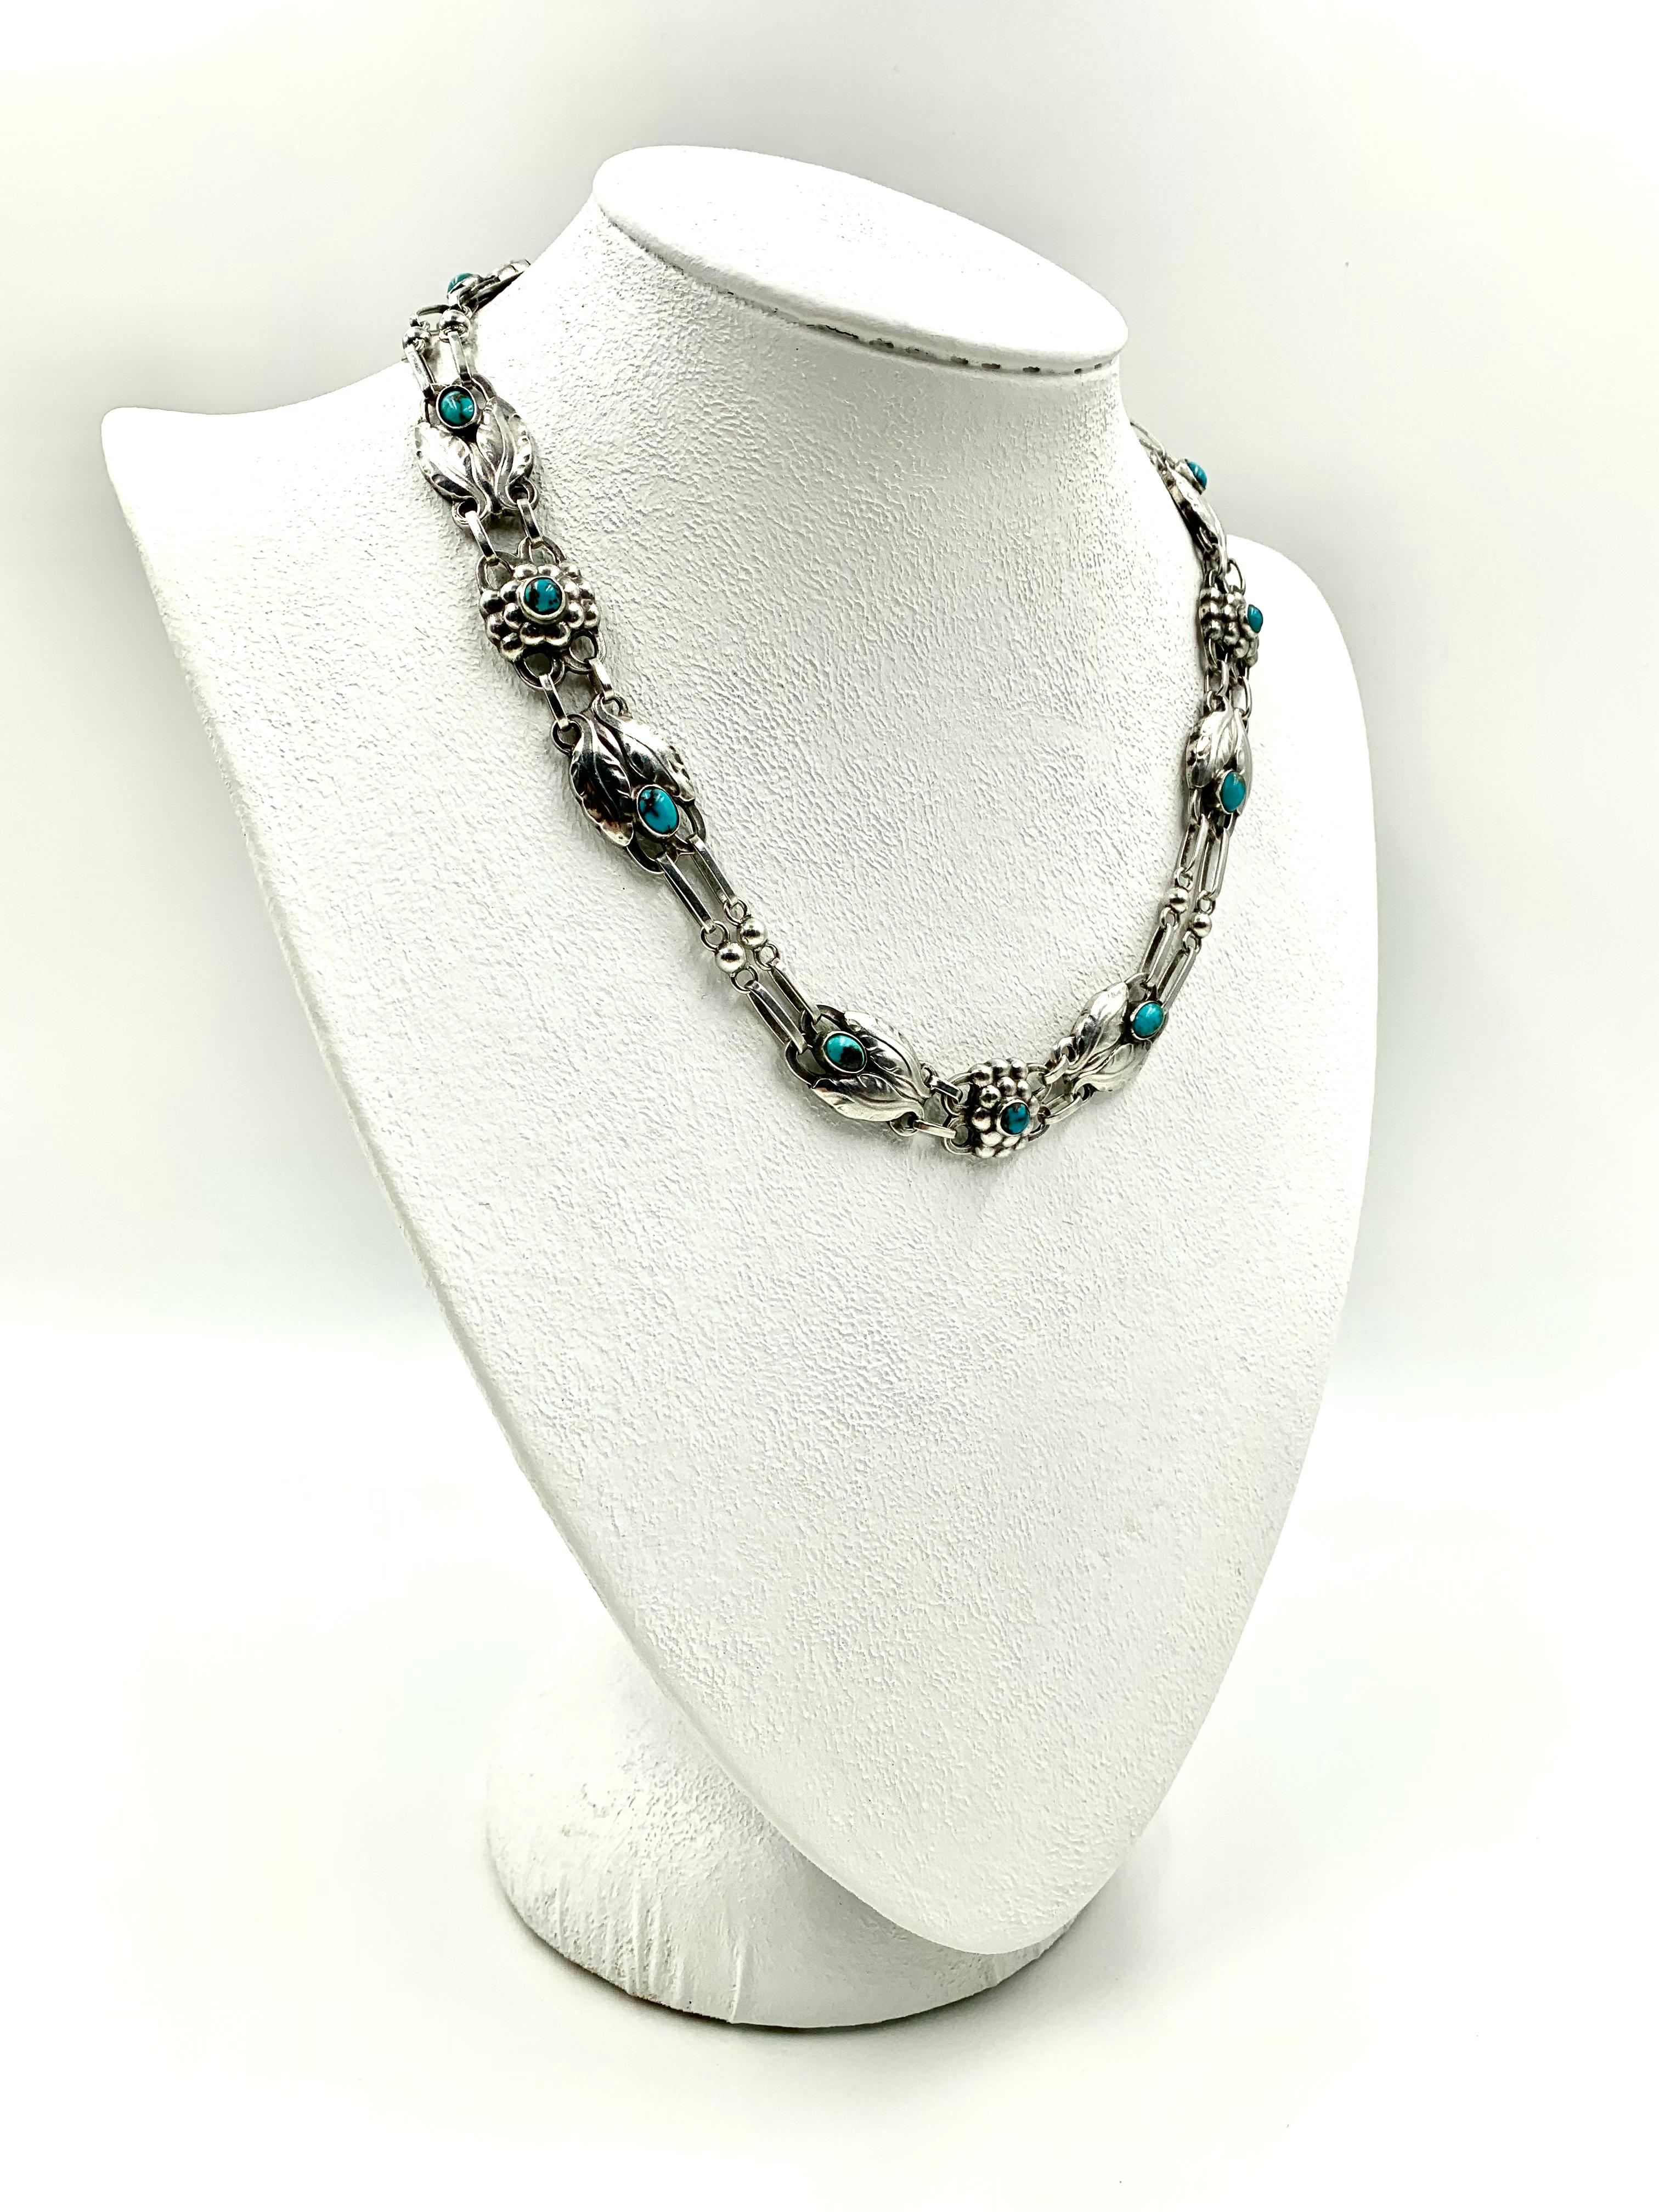 Rare Early Georg Jensen Cabochon Turquoise and Silver #1 Necklace, 1910-1925 For Sale 4